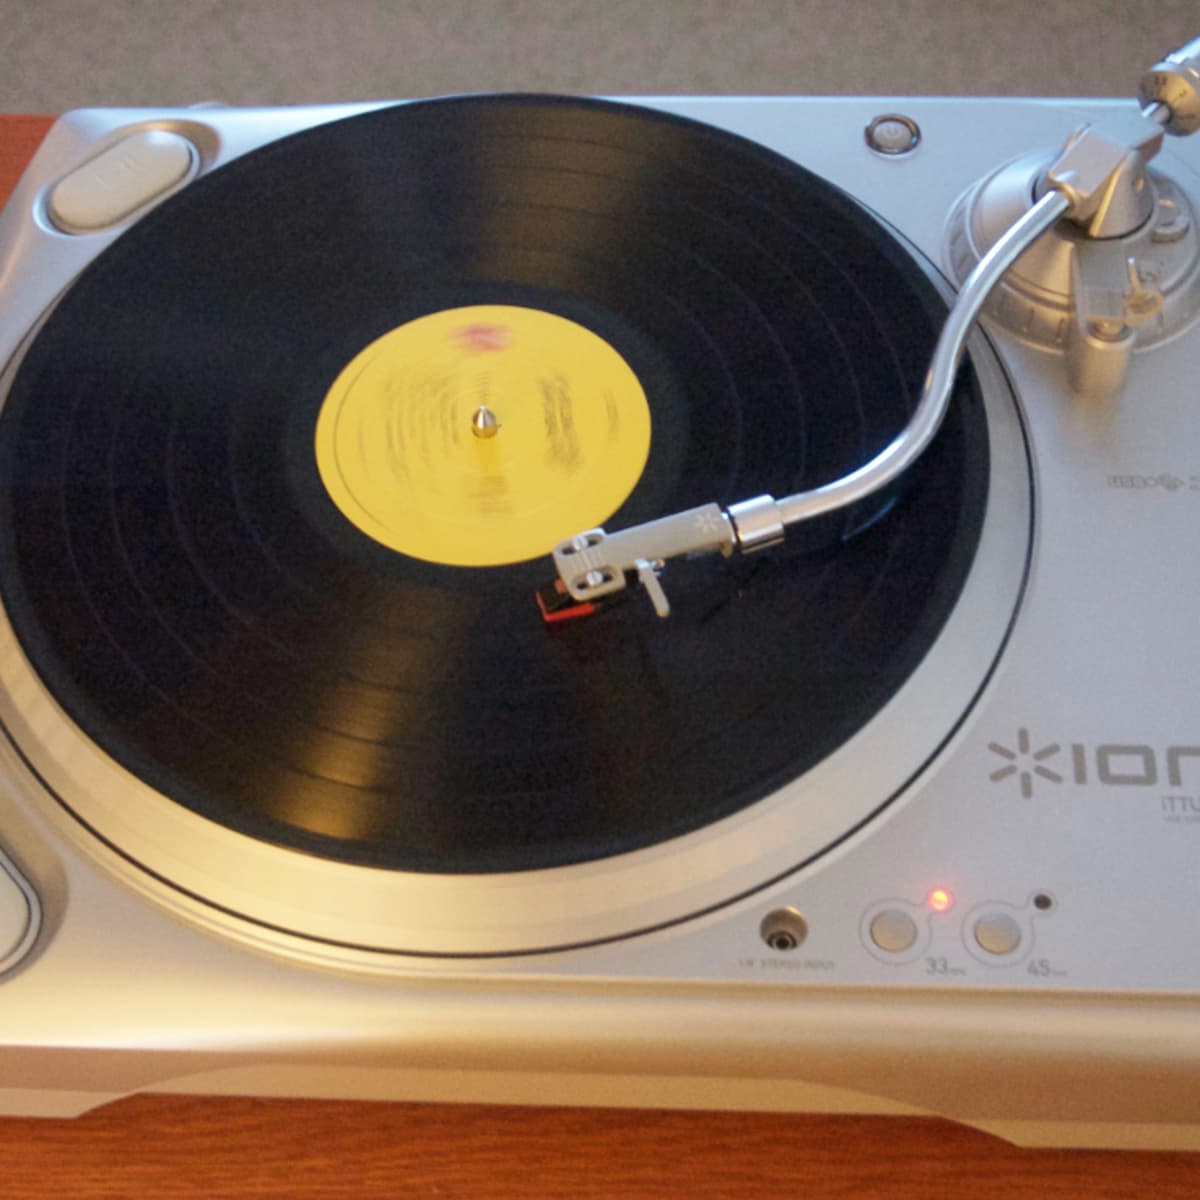 How to Vinyl Records to MP3 or A Step-by-Step Guide - TurboFuture